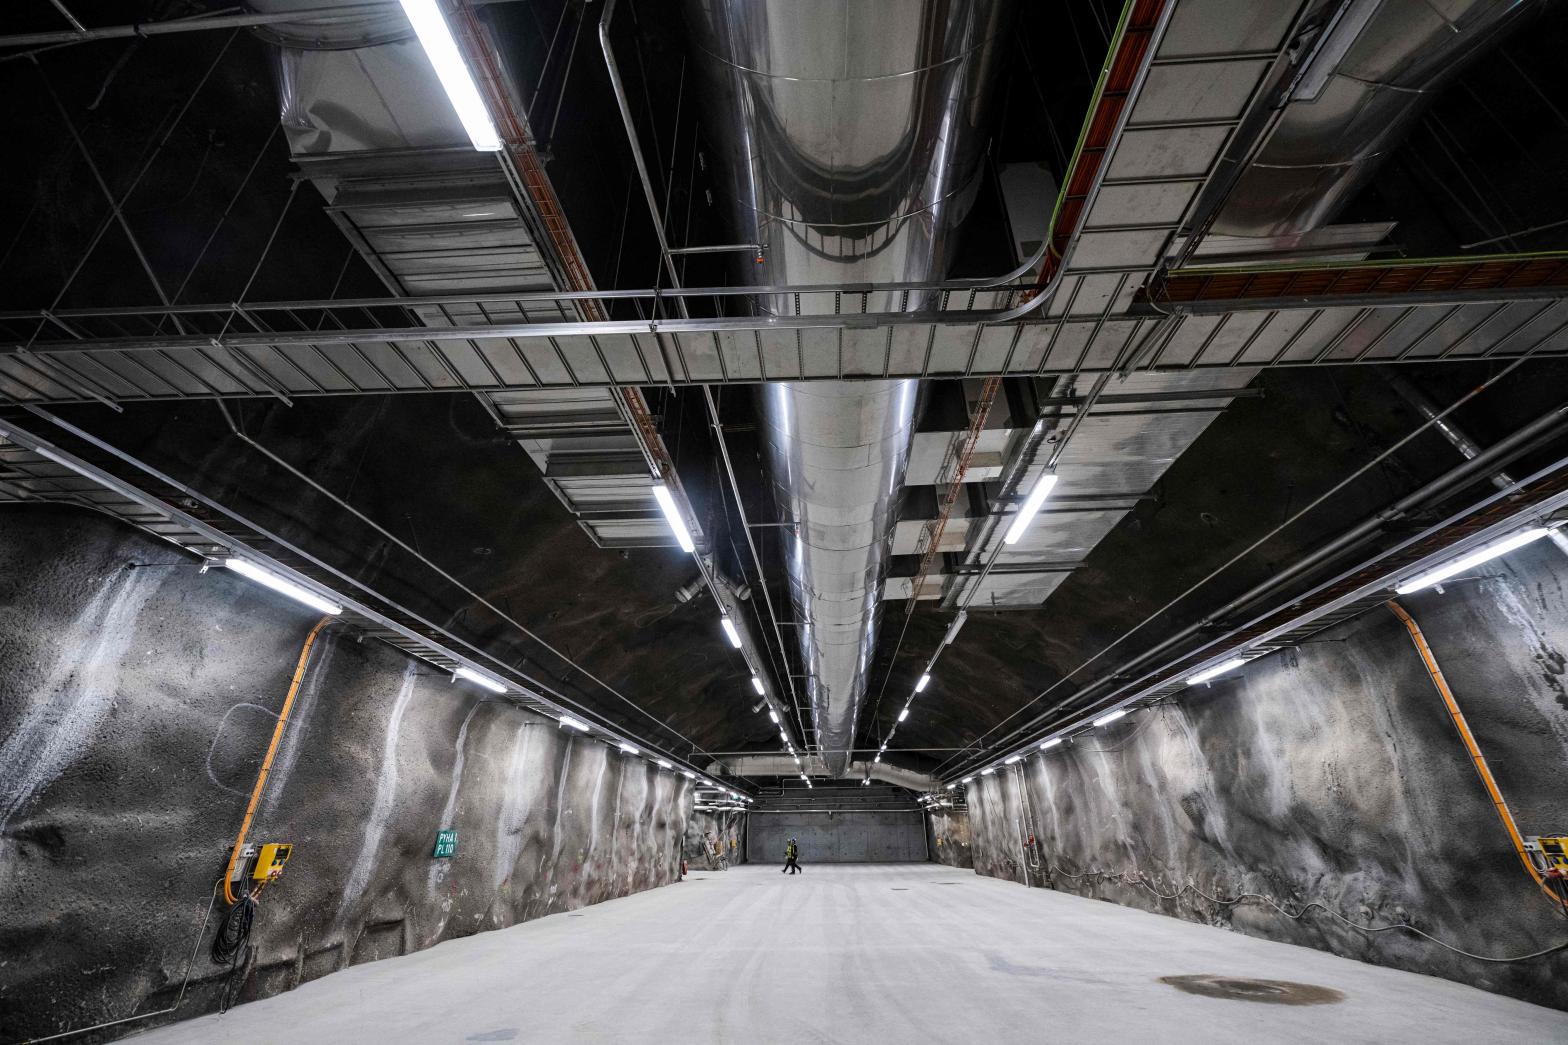 Engineers Can Build a Site to Secure Nuclear Waste for 100,000 Years. Who Will Live Nearby?